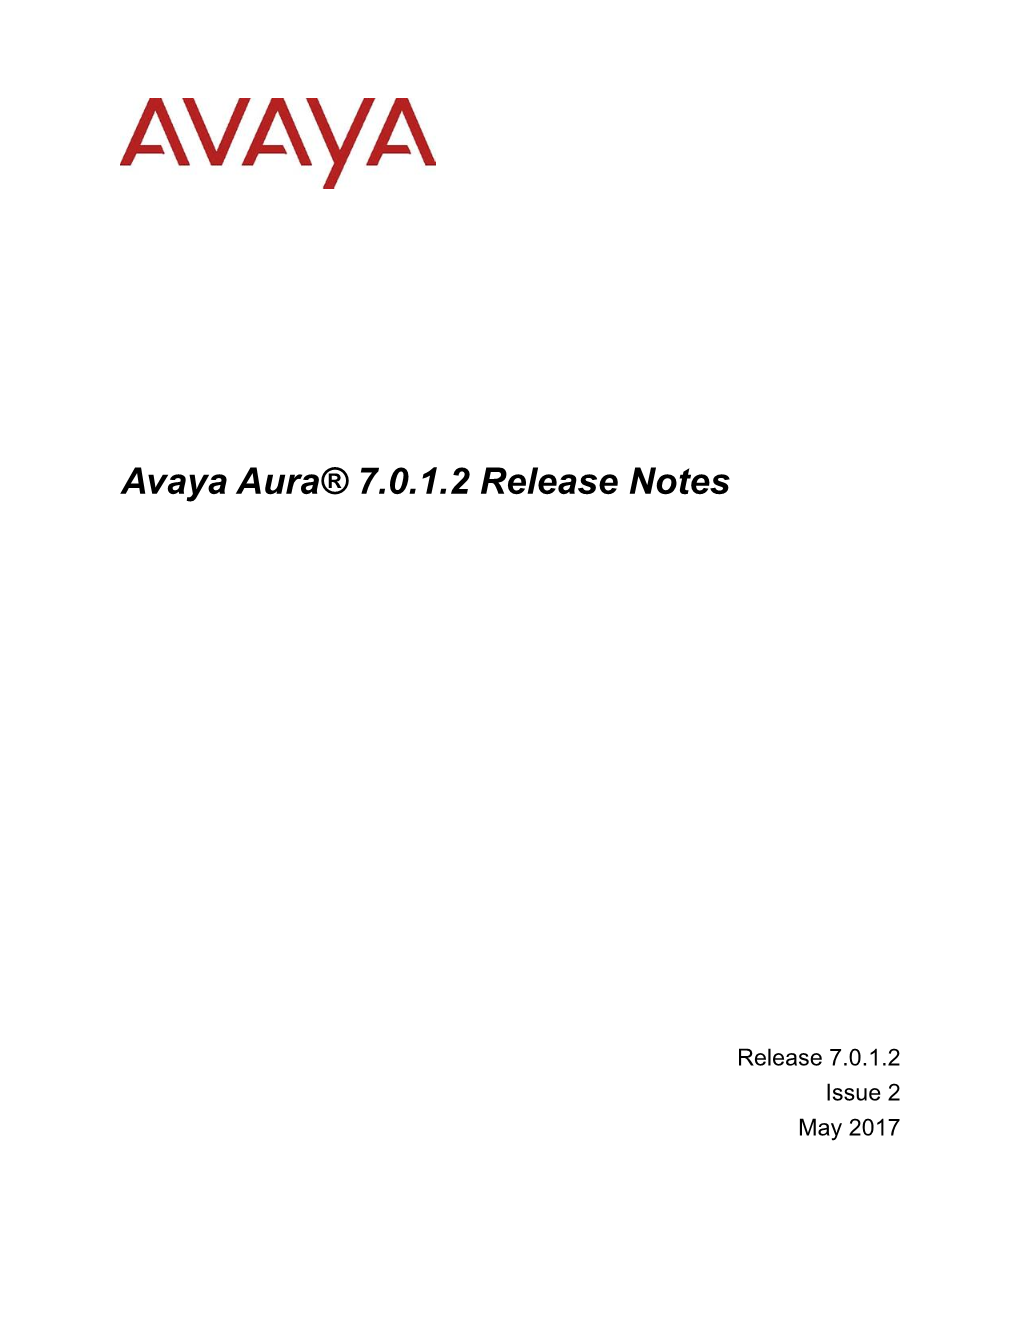 Avaya Aura 7.0.1.2 Release Notes, Issue 2, May